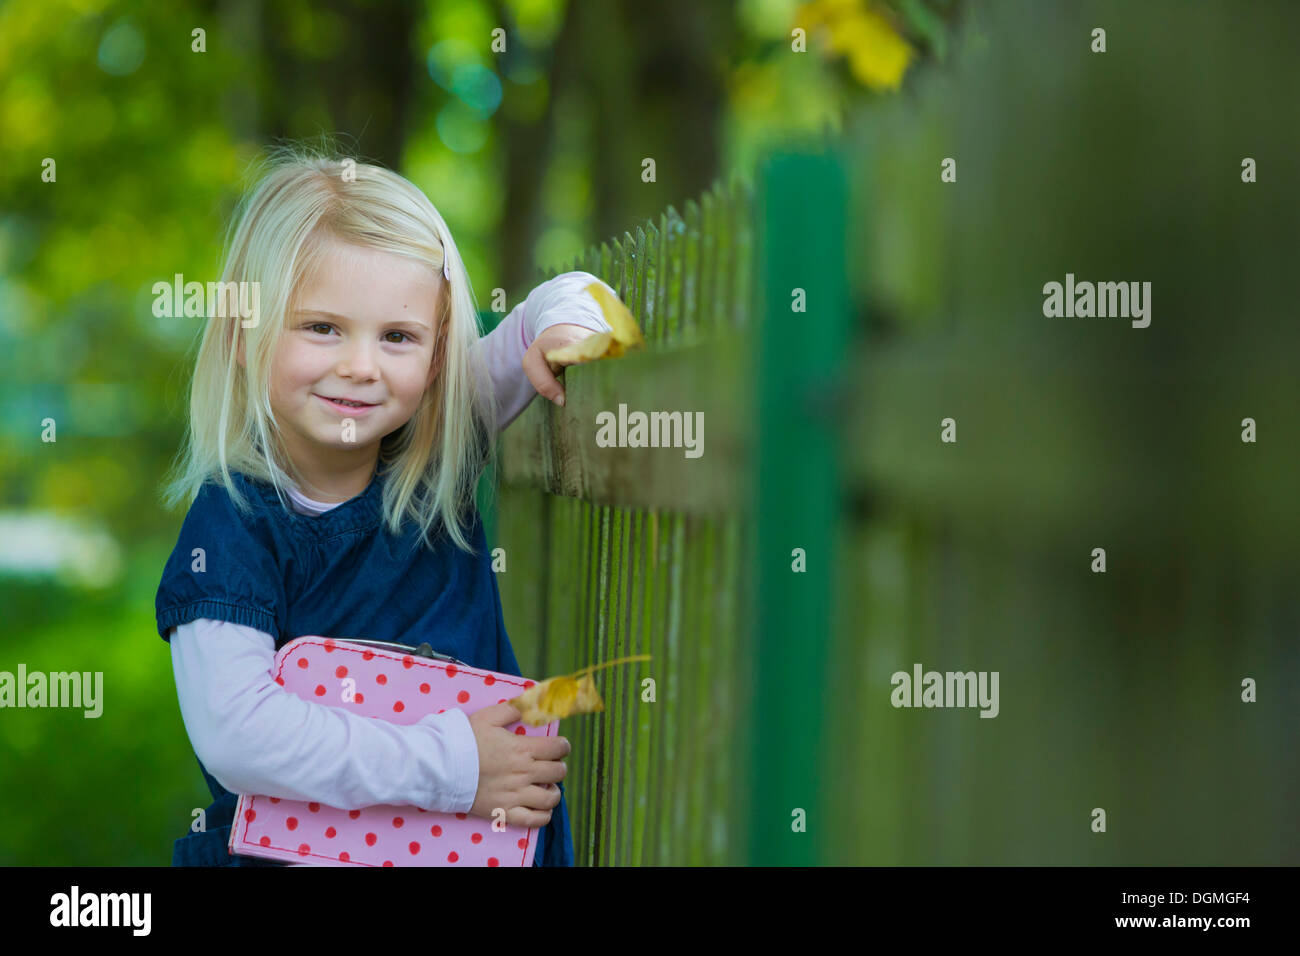 Girl, 4 years old, holding a suitcase leaning against a wooden fence Stock Photo